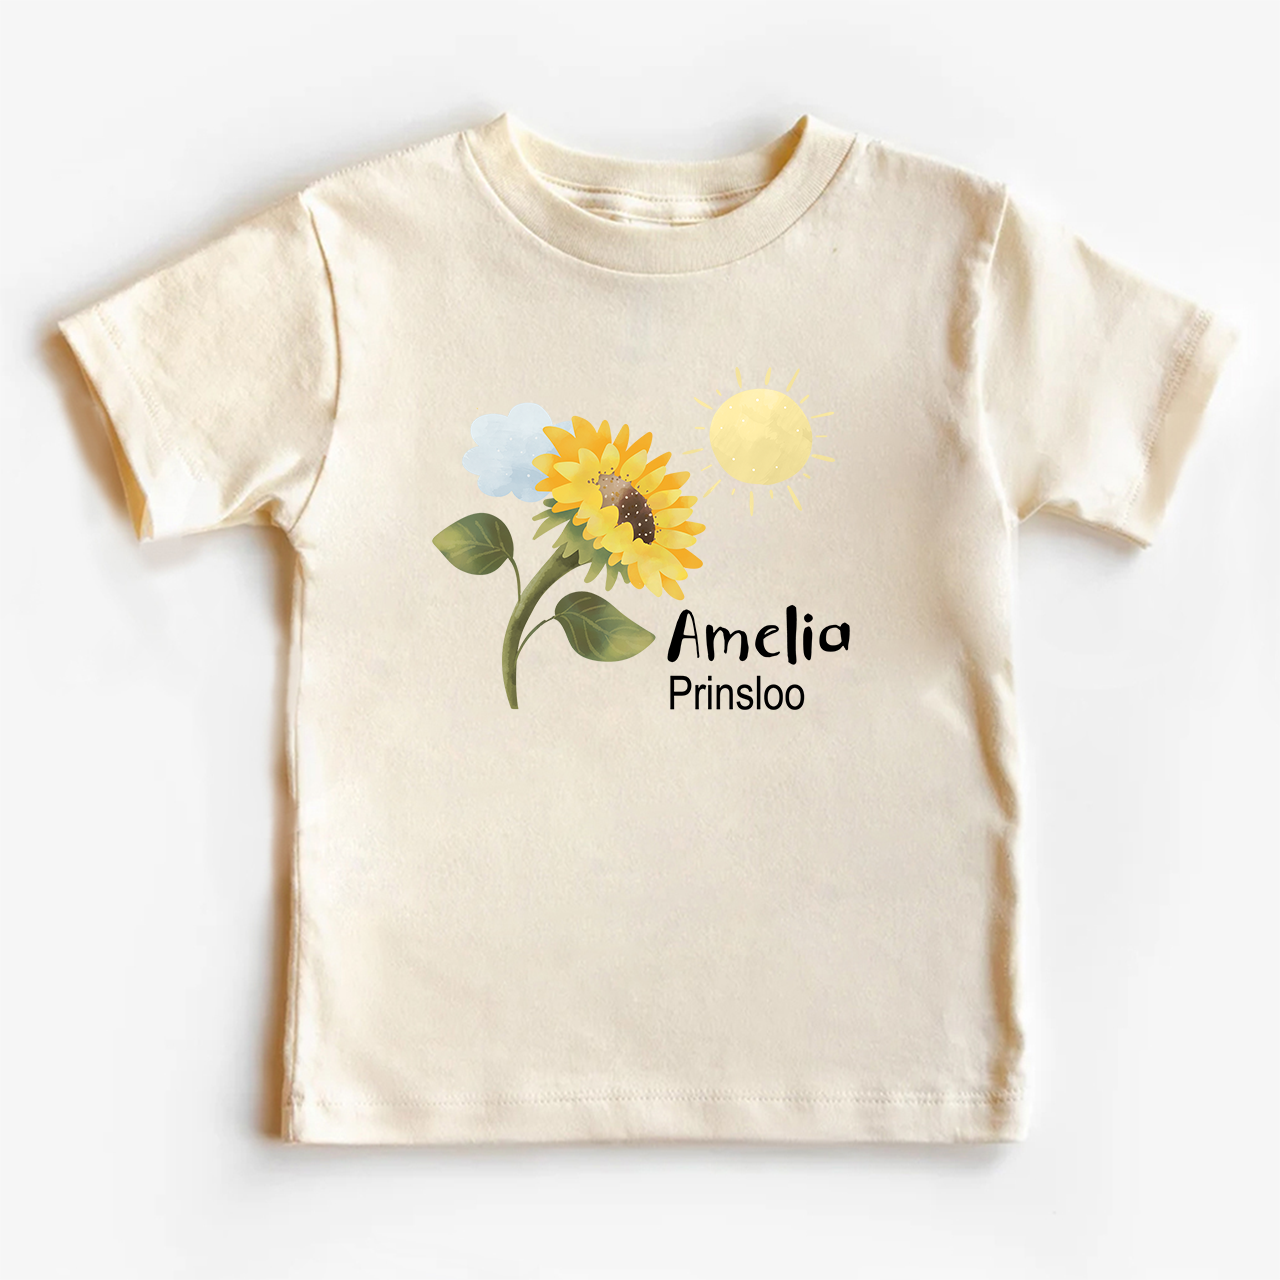 Personalized Sunflower Shirt For Kids